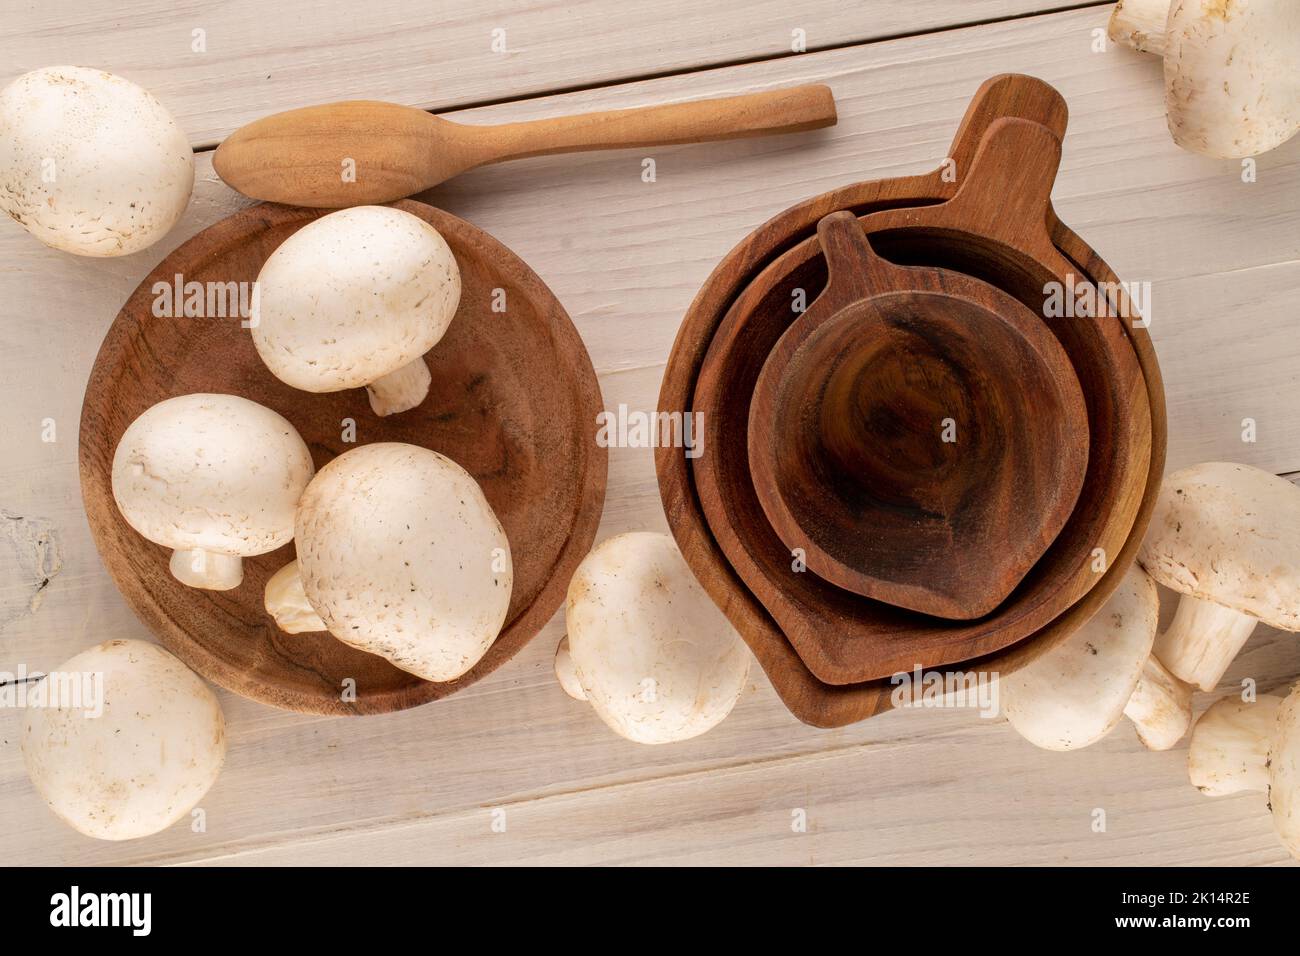 Several fresh organic mushrooms with wooden utensils on a wooden table, close-up, top view. Stock Photo